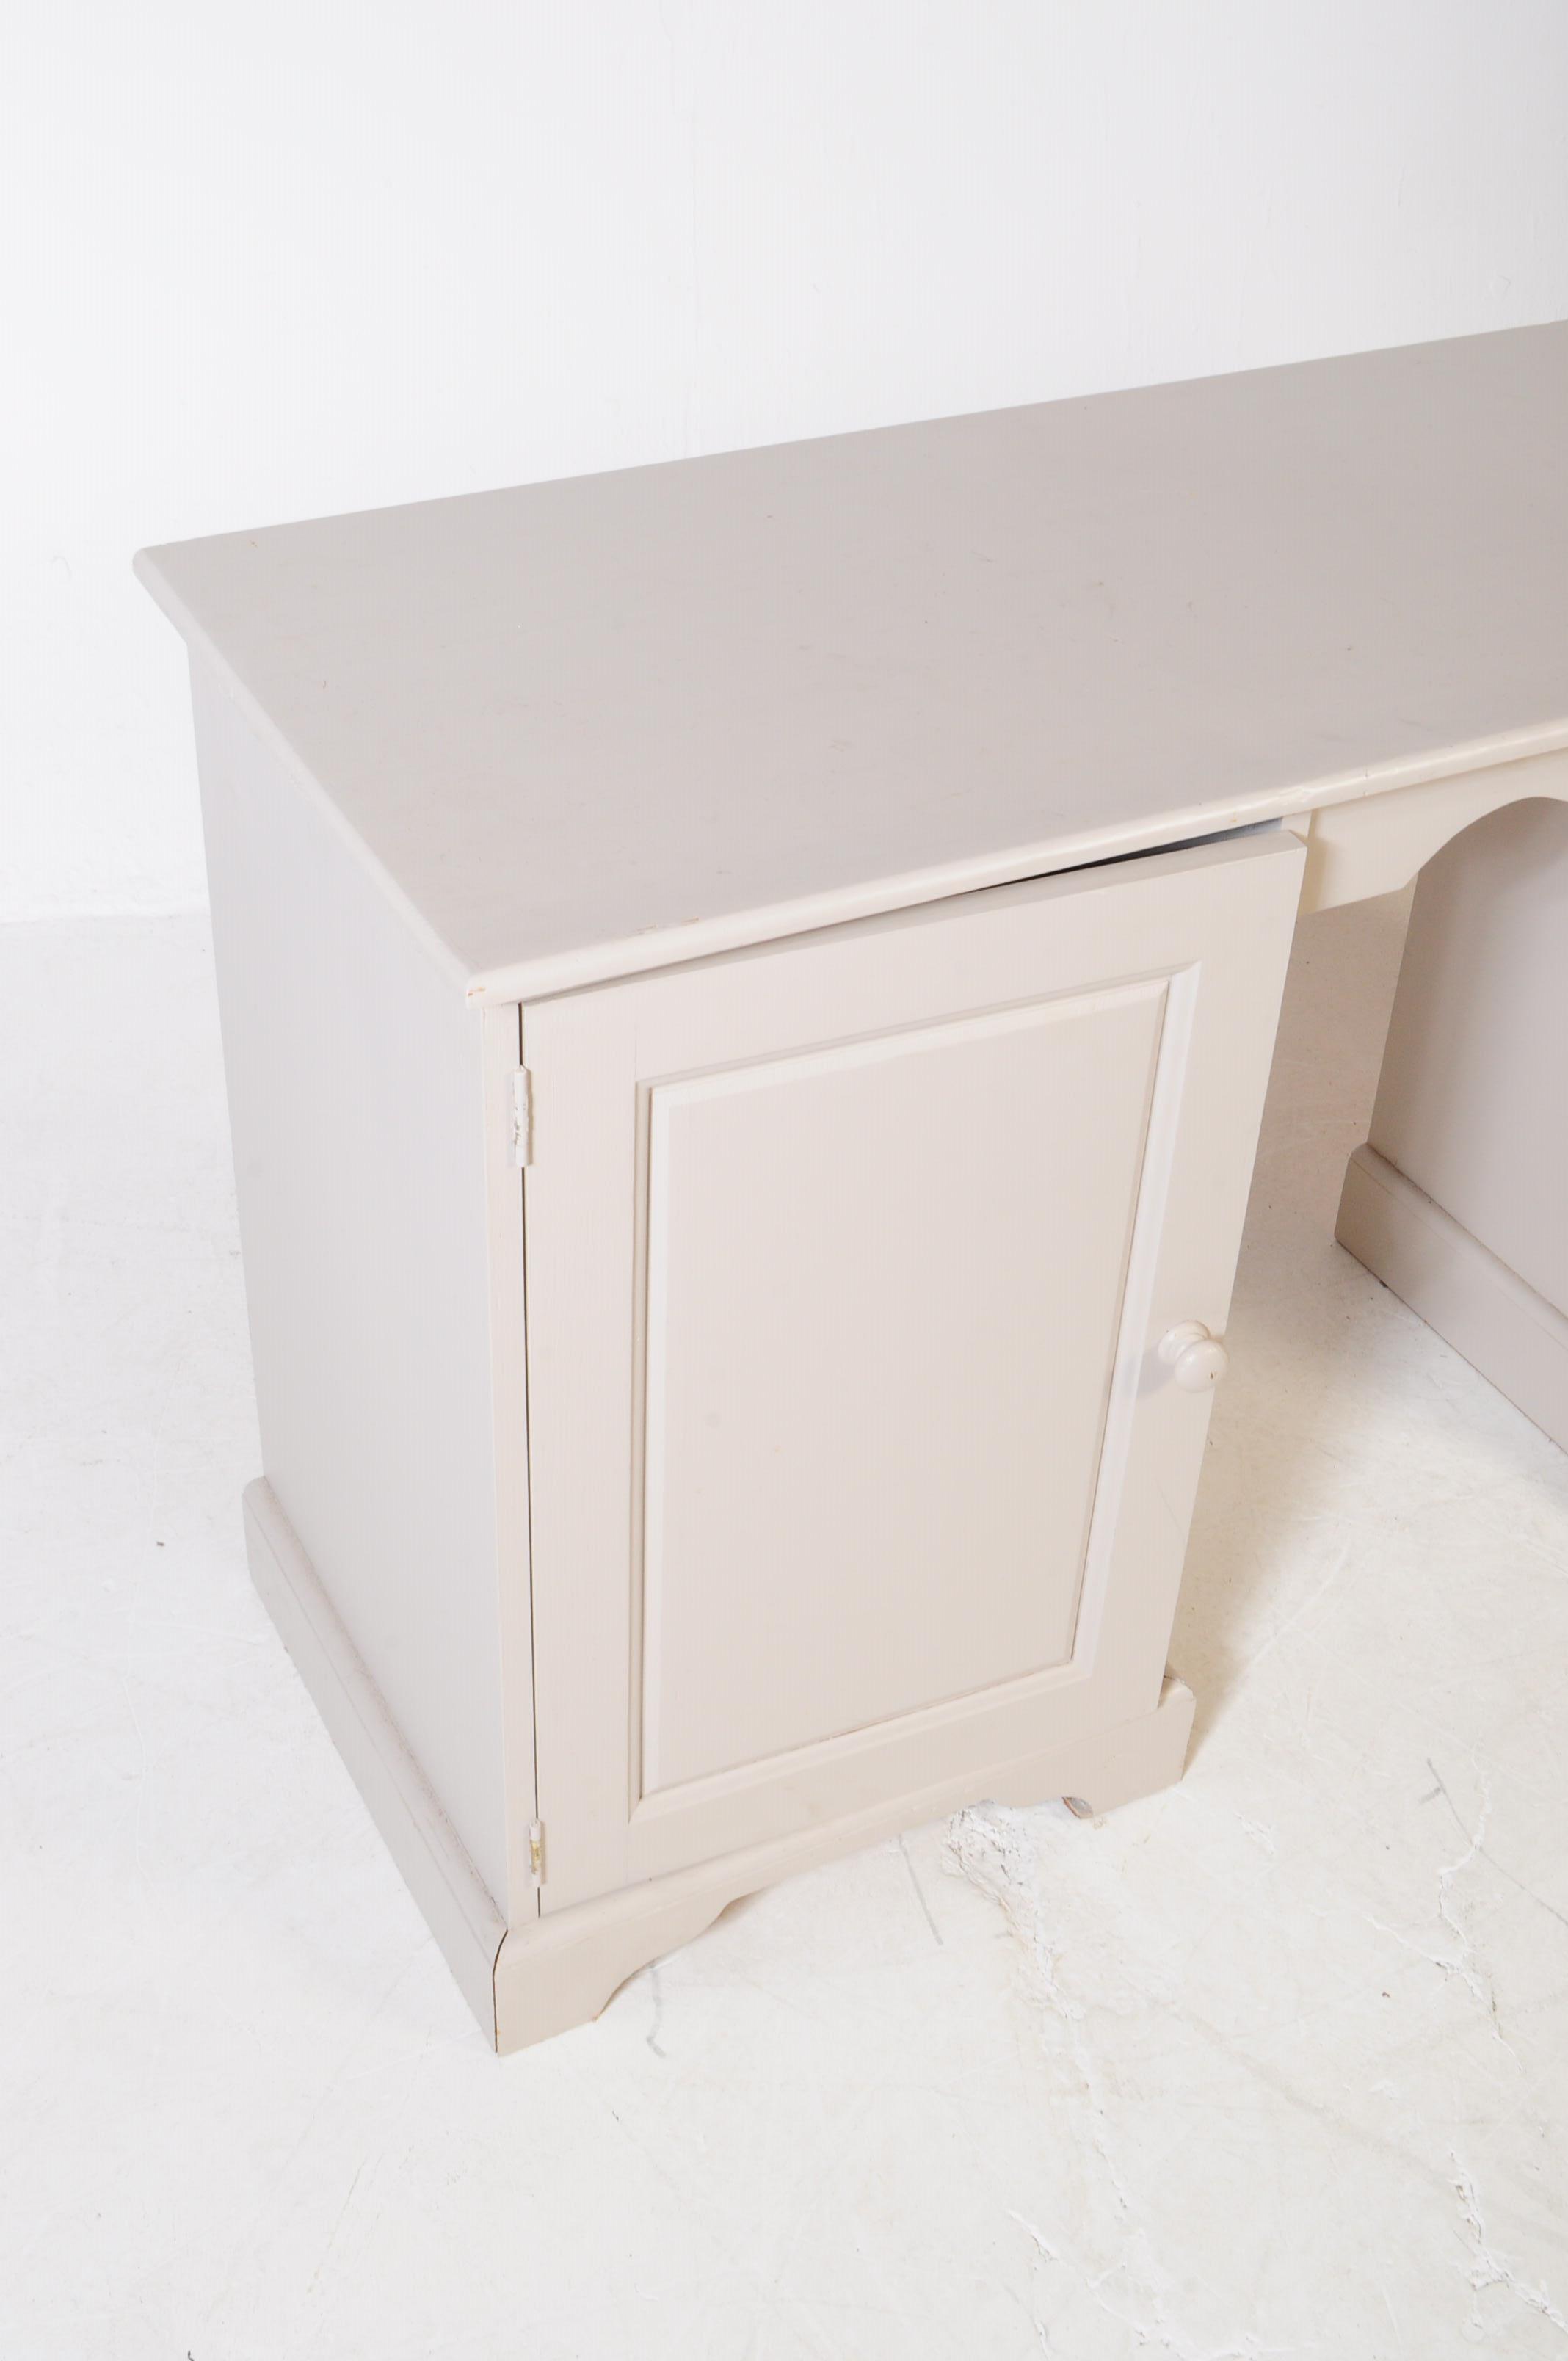 CONTEMPORARY PAINTED PINE WRITING DESK / DRESSER - Image 2 of 5